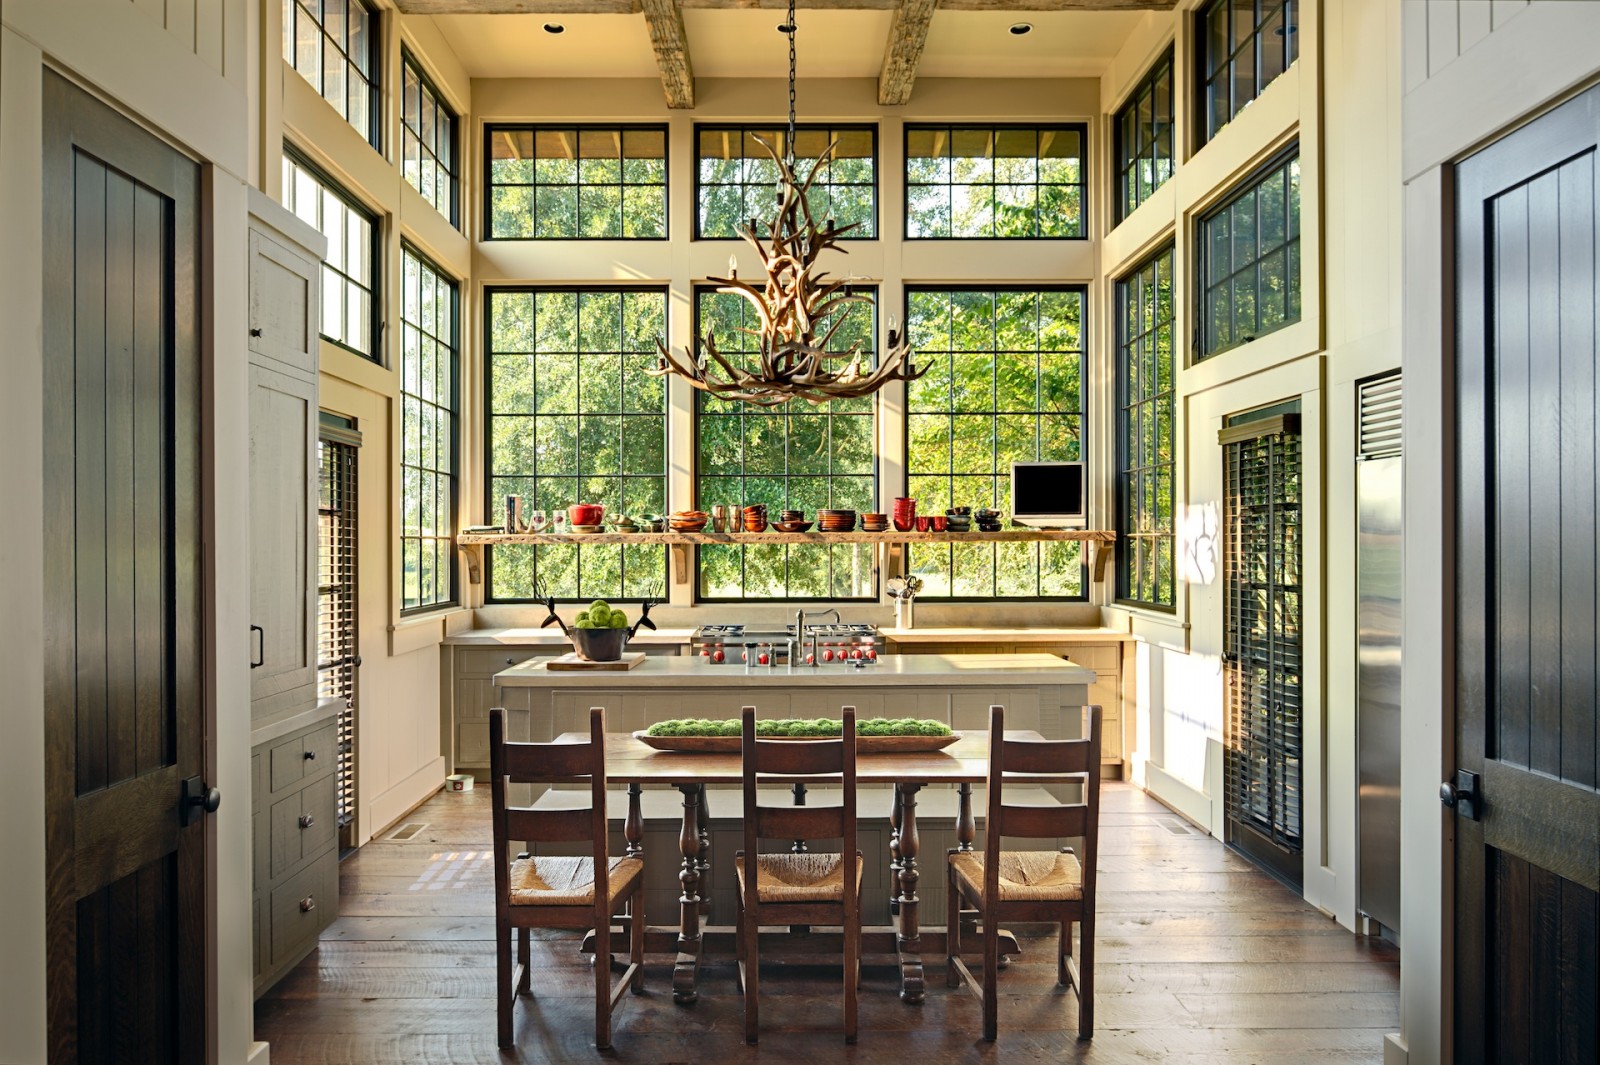 Rustic kitchen full of light and windows with open shelving by Jeffrey Dungan. https://kristywicks.com